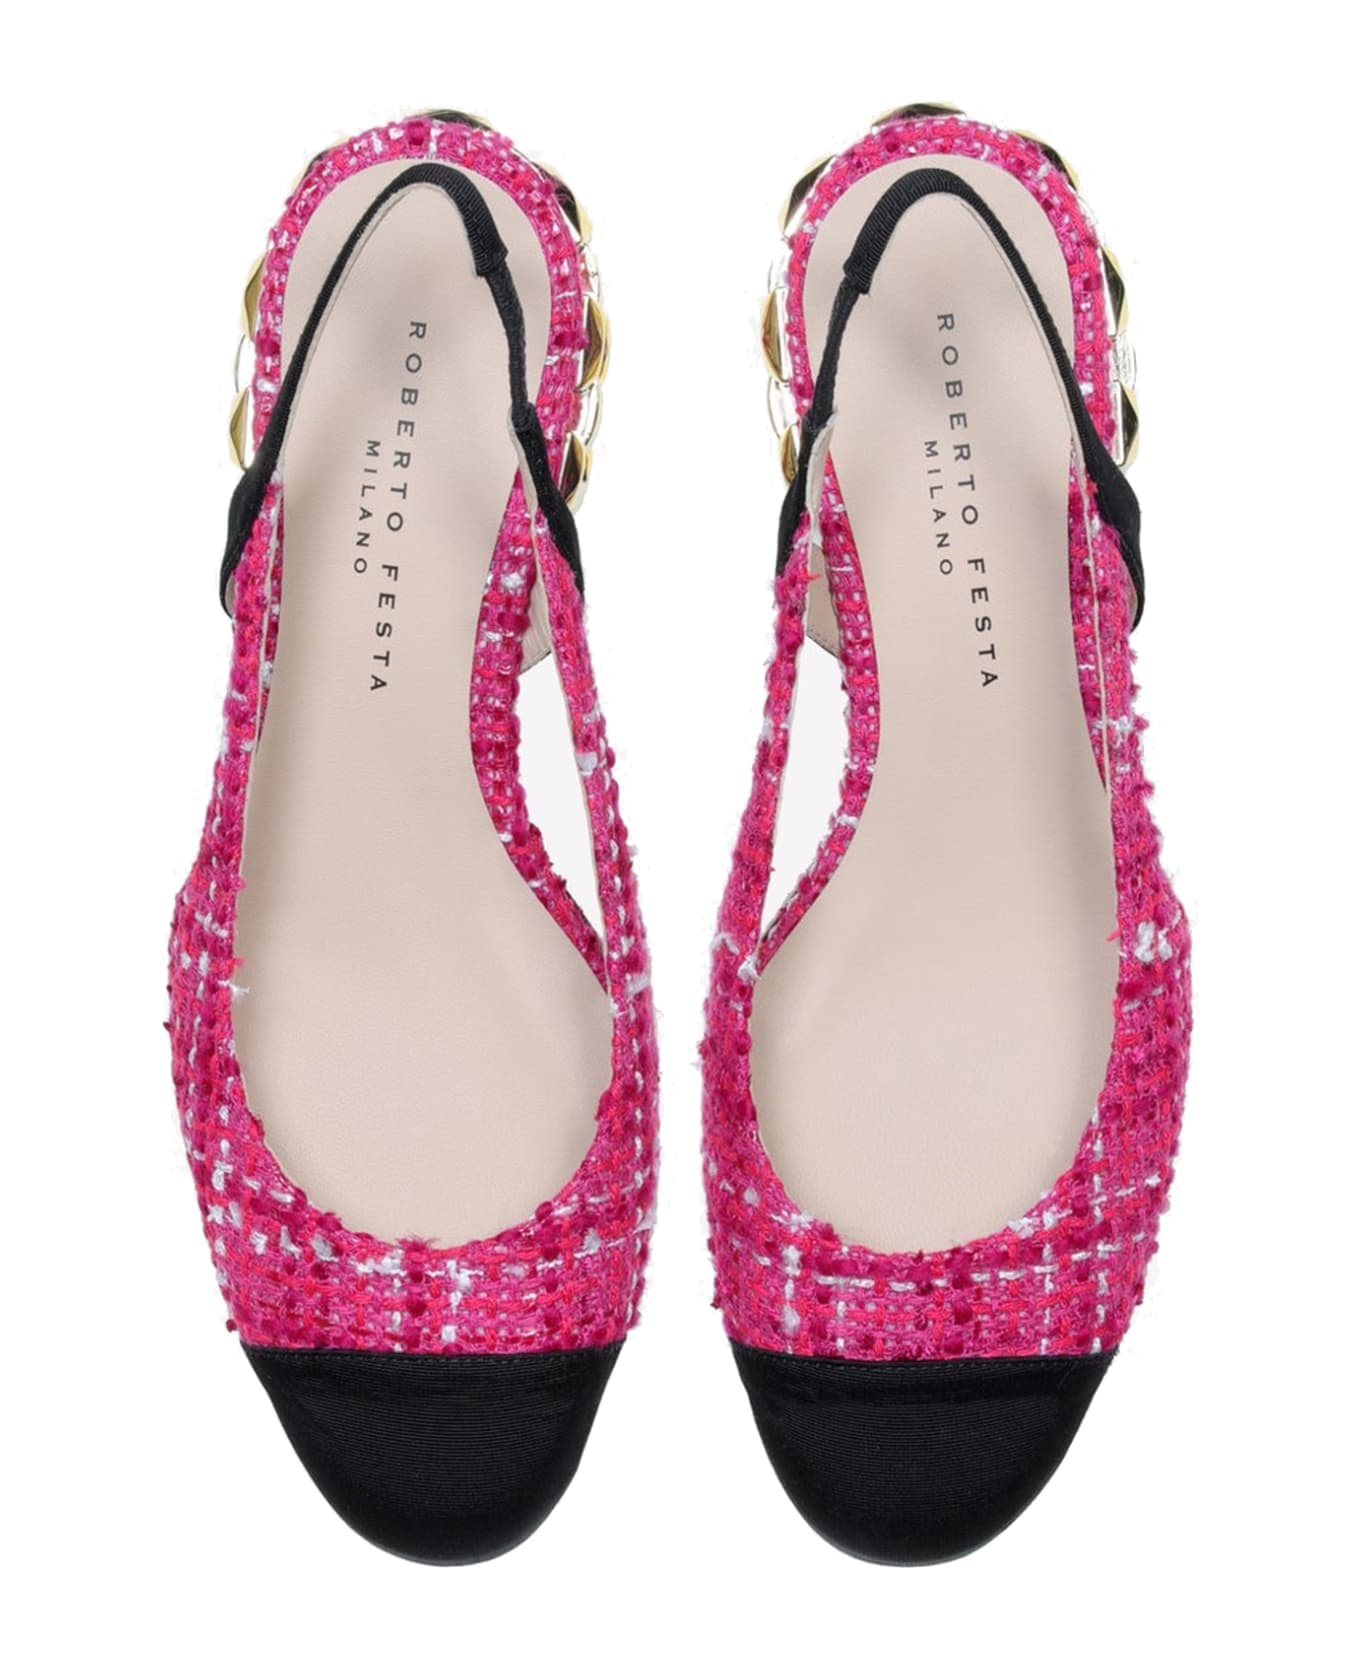 Roberto Festa Chanel Slingback In Cherry Tweed With Gold Chain Heel - FUXIA